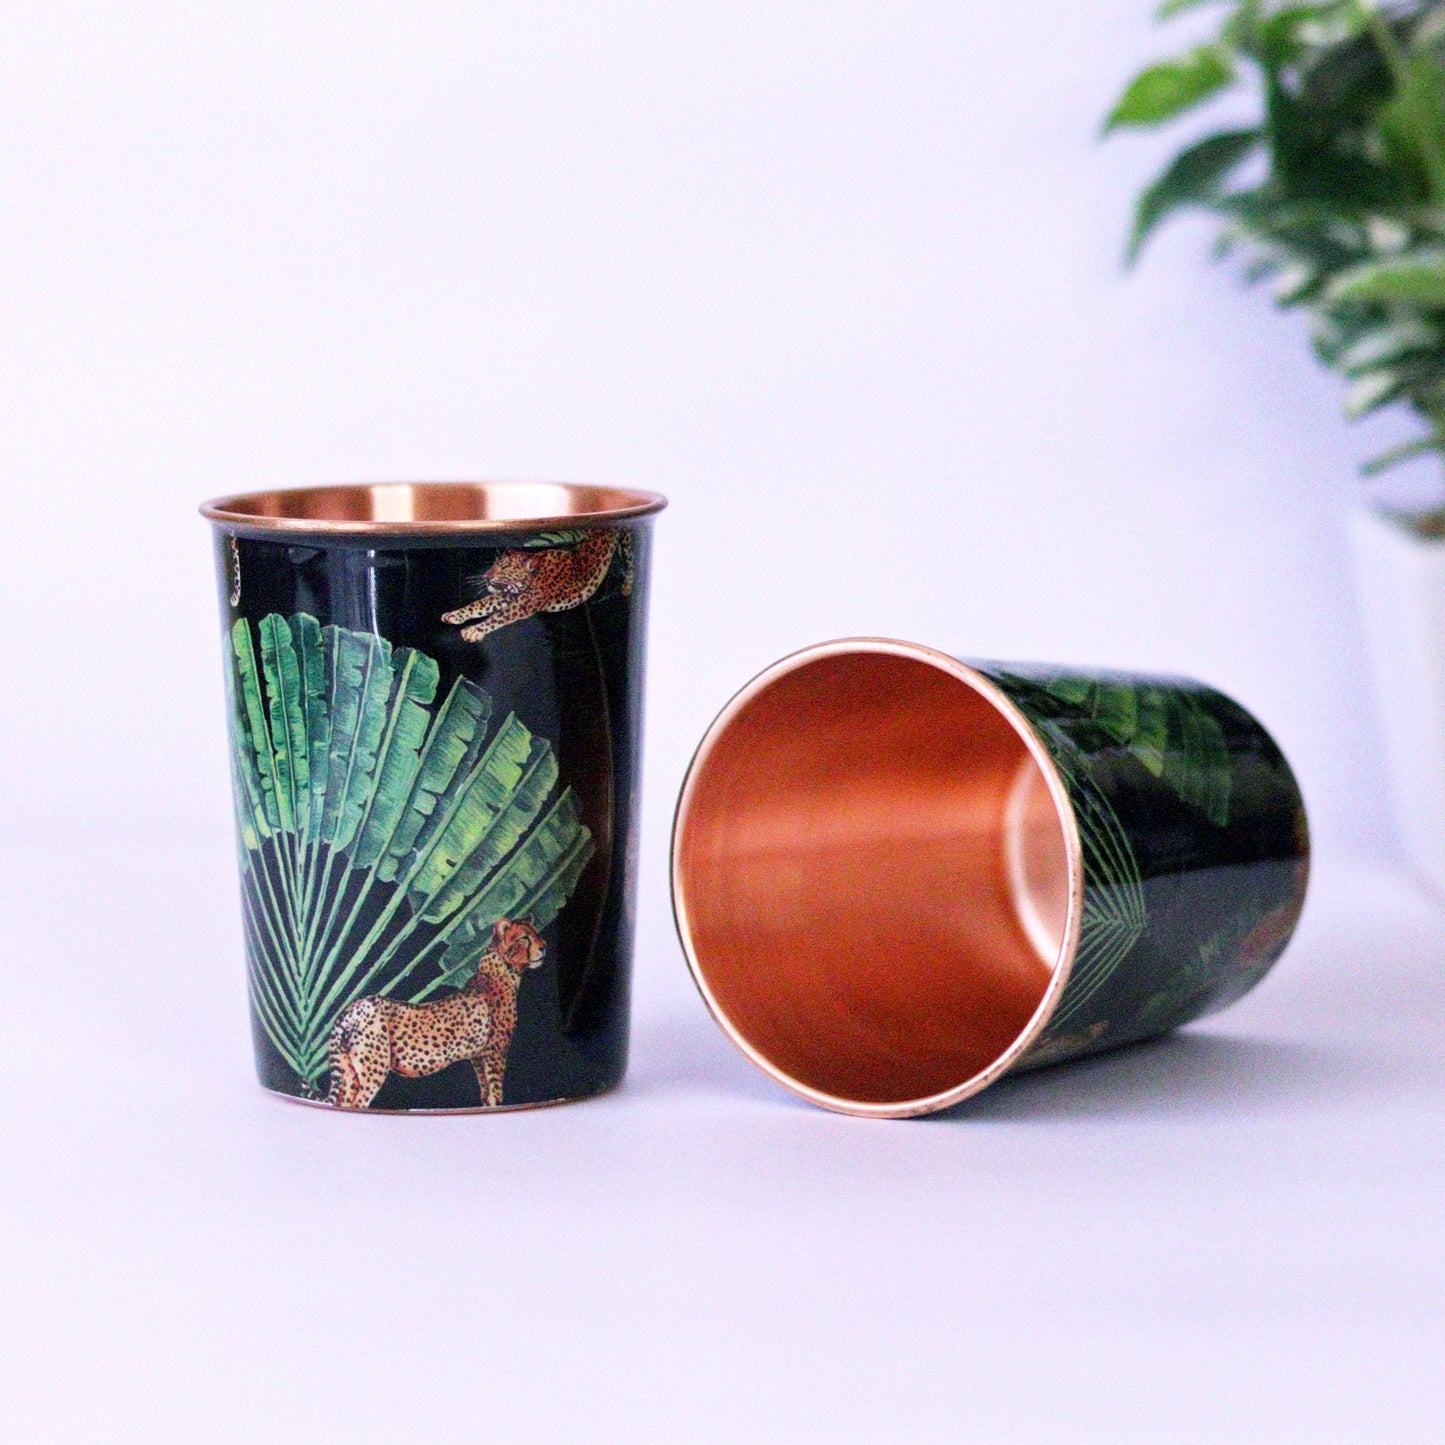 The Leopard Print Copper Bottle and Tumblers - Gift Set